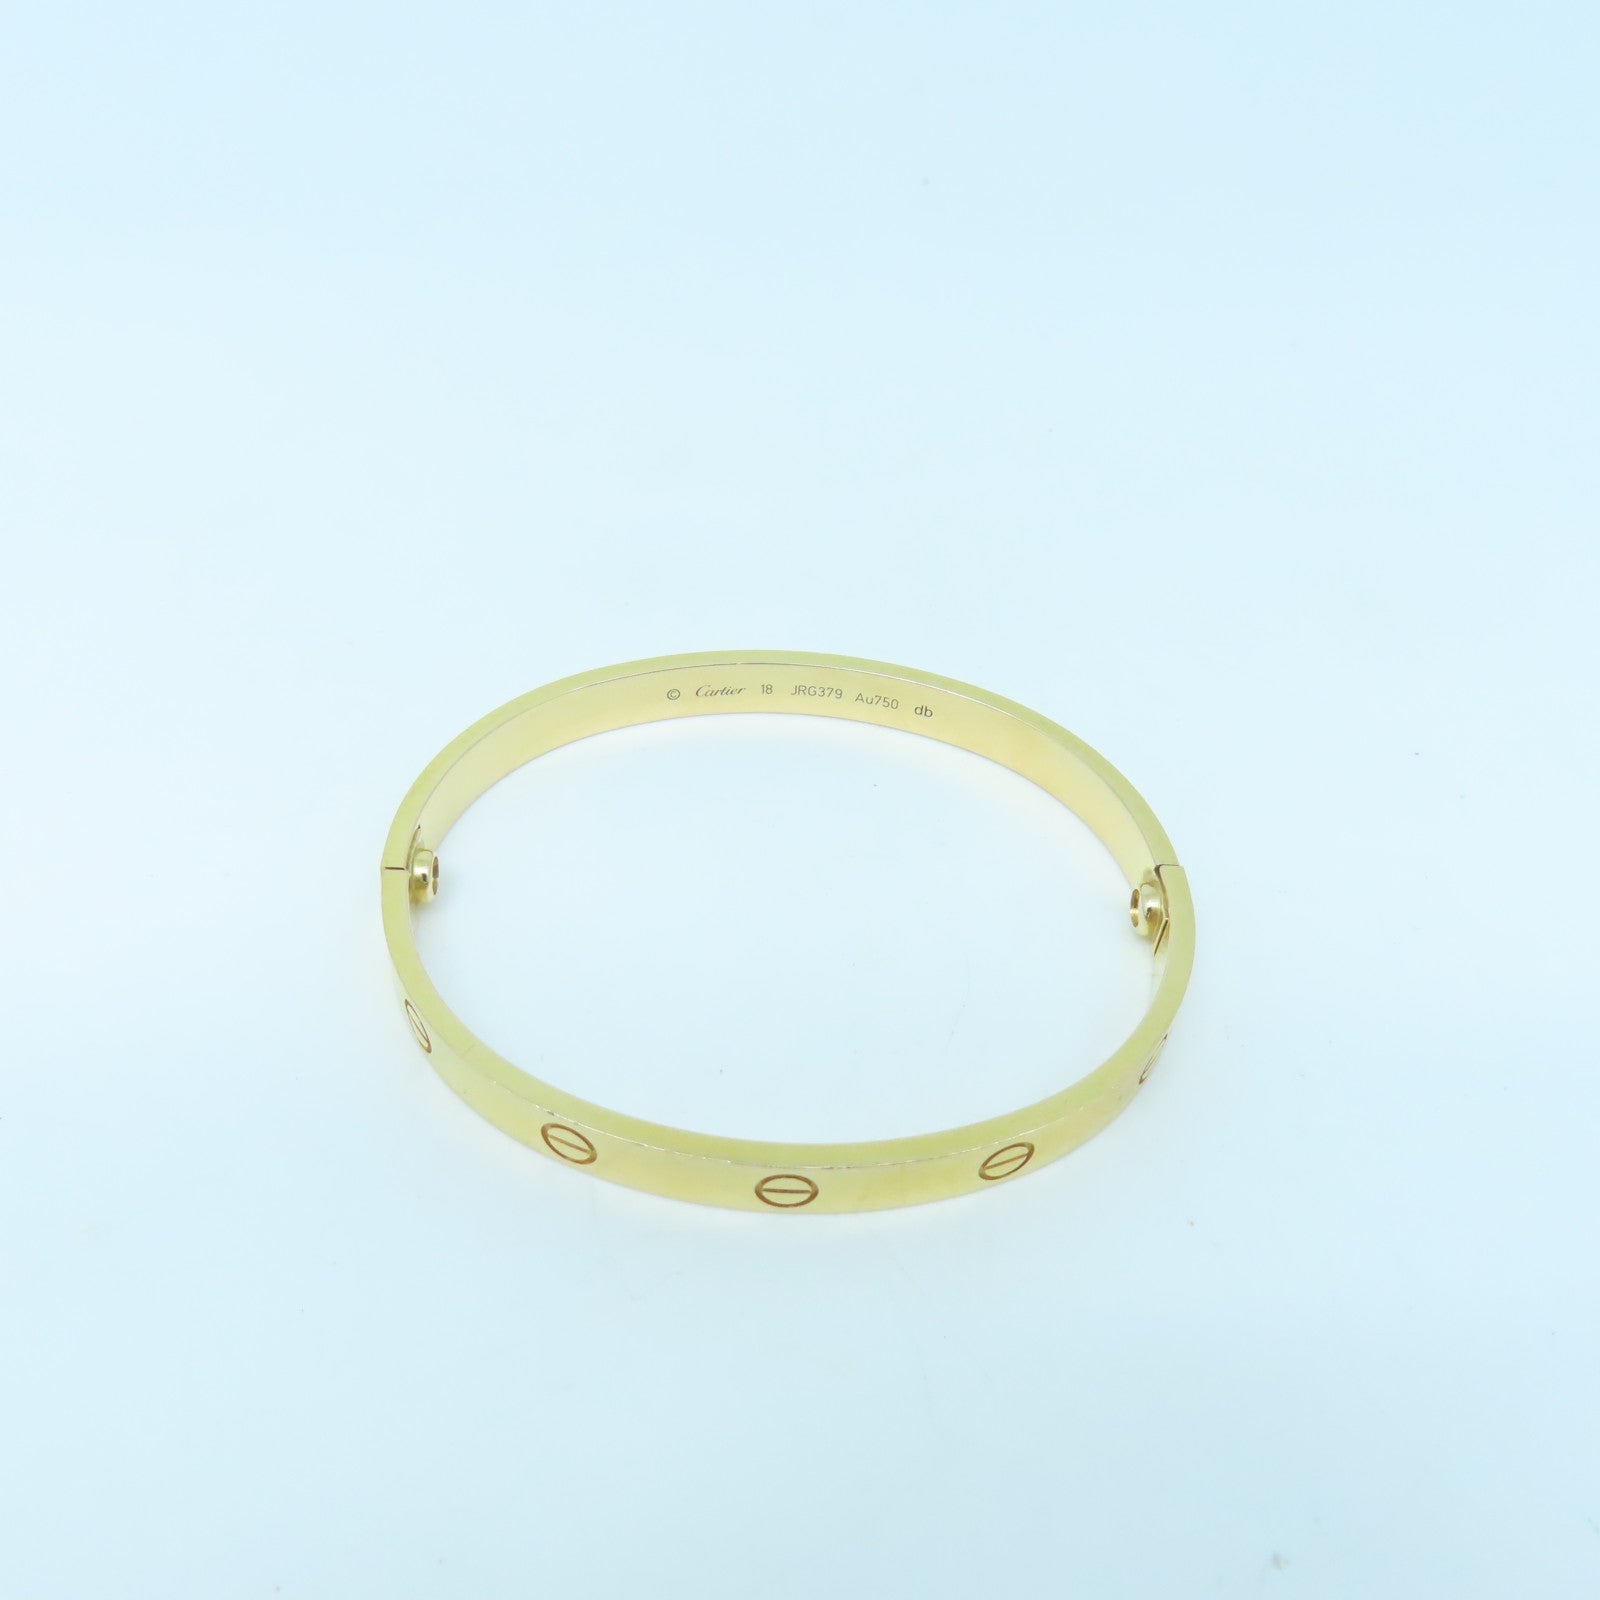 Cartier Love Collection Bangle Bracelet Size 17 in Yellow Gold | New York  Jewelers Chicago